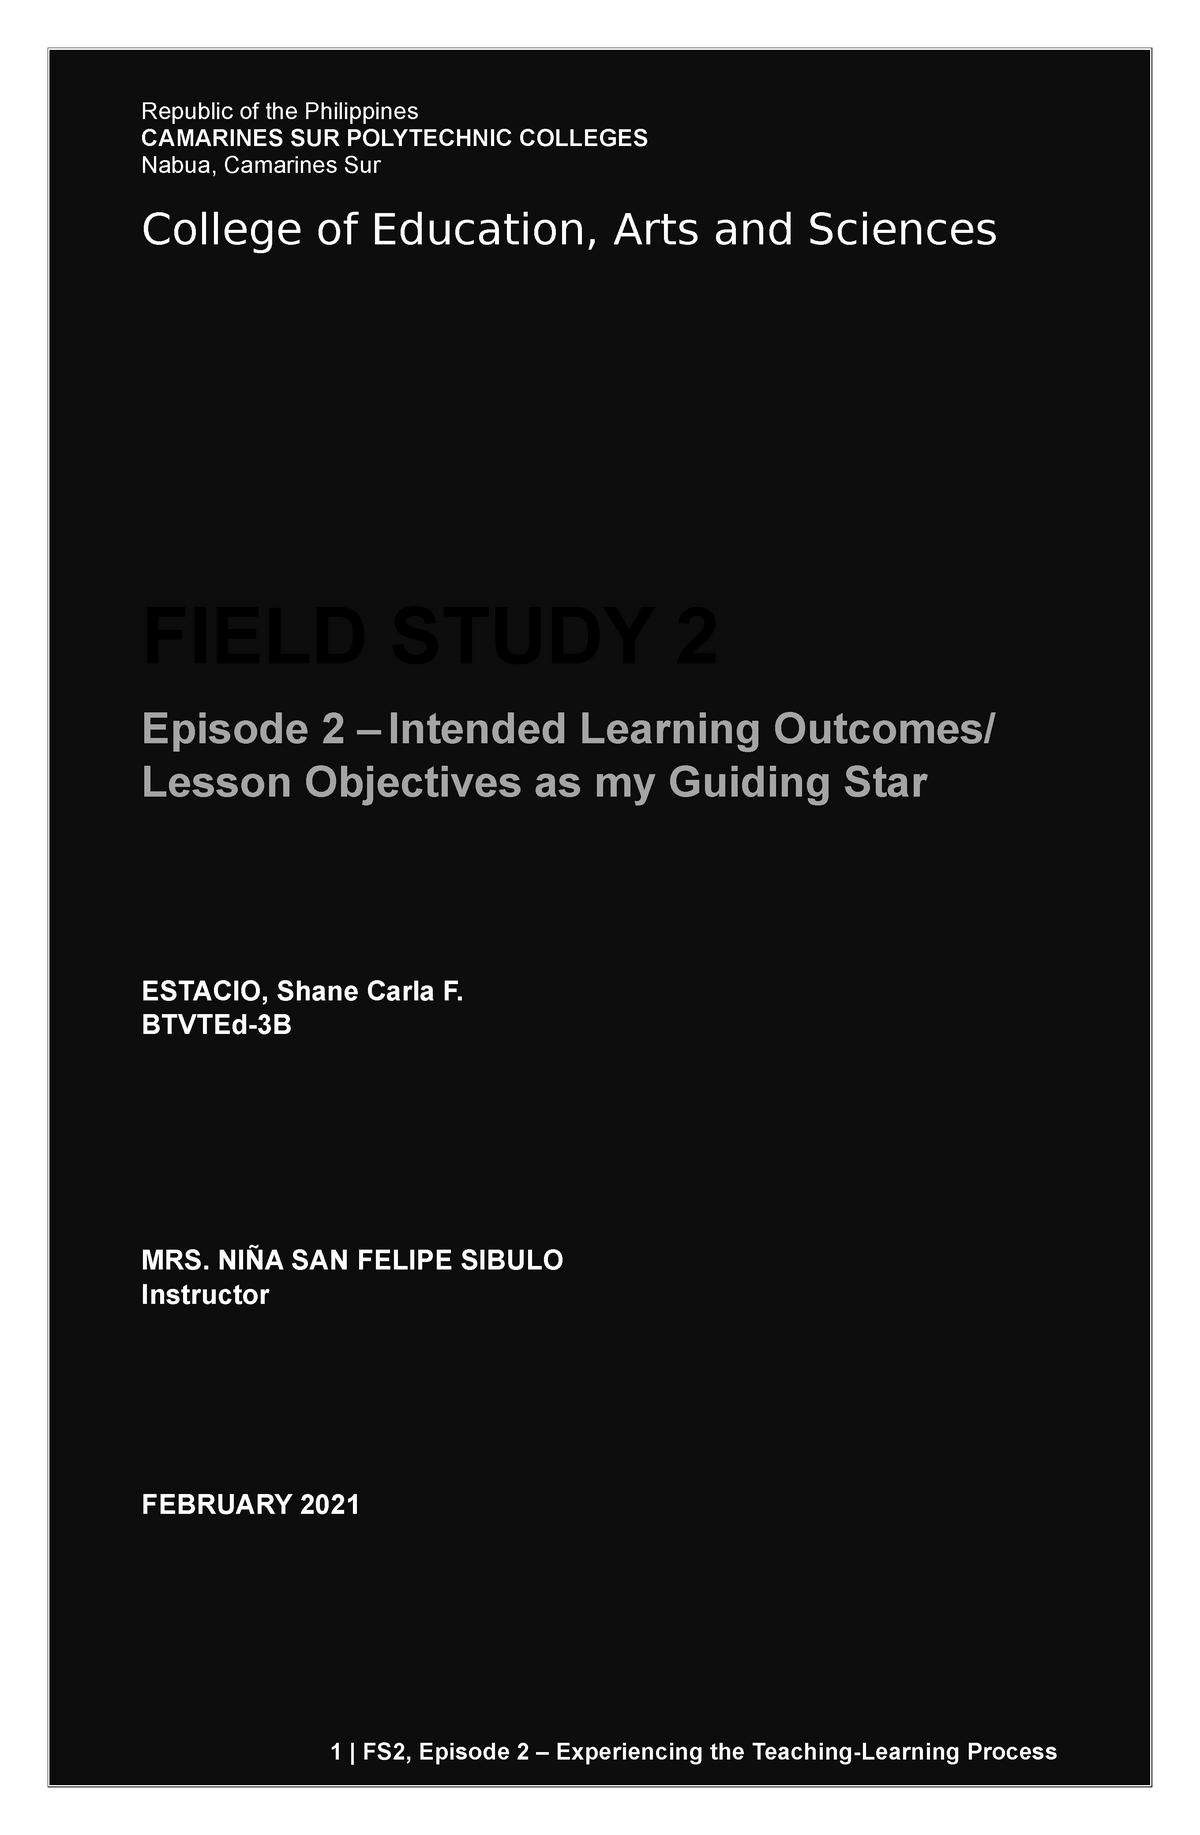 field study 2 experiencing the teaching learning process episode 2